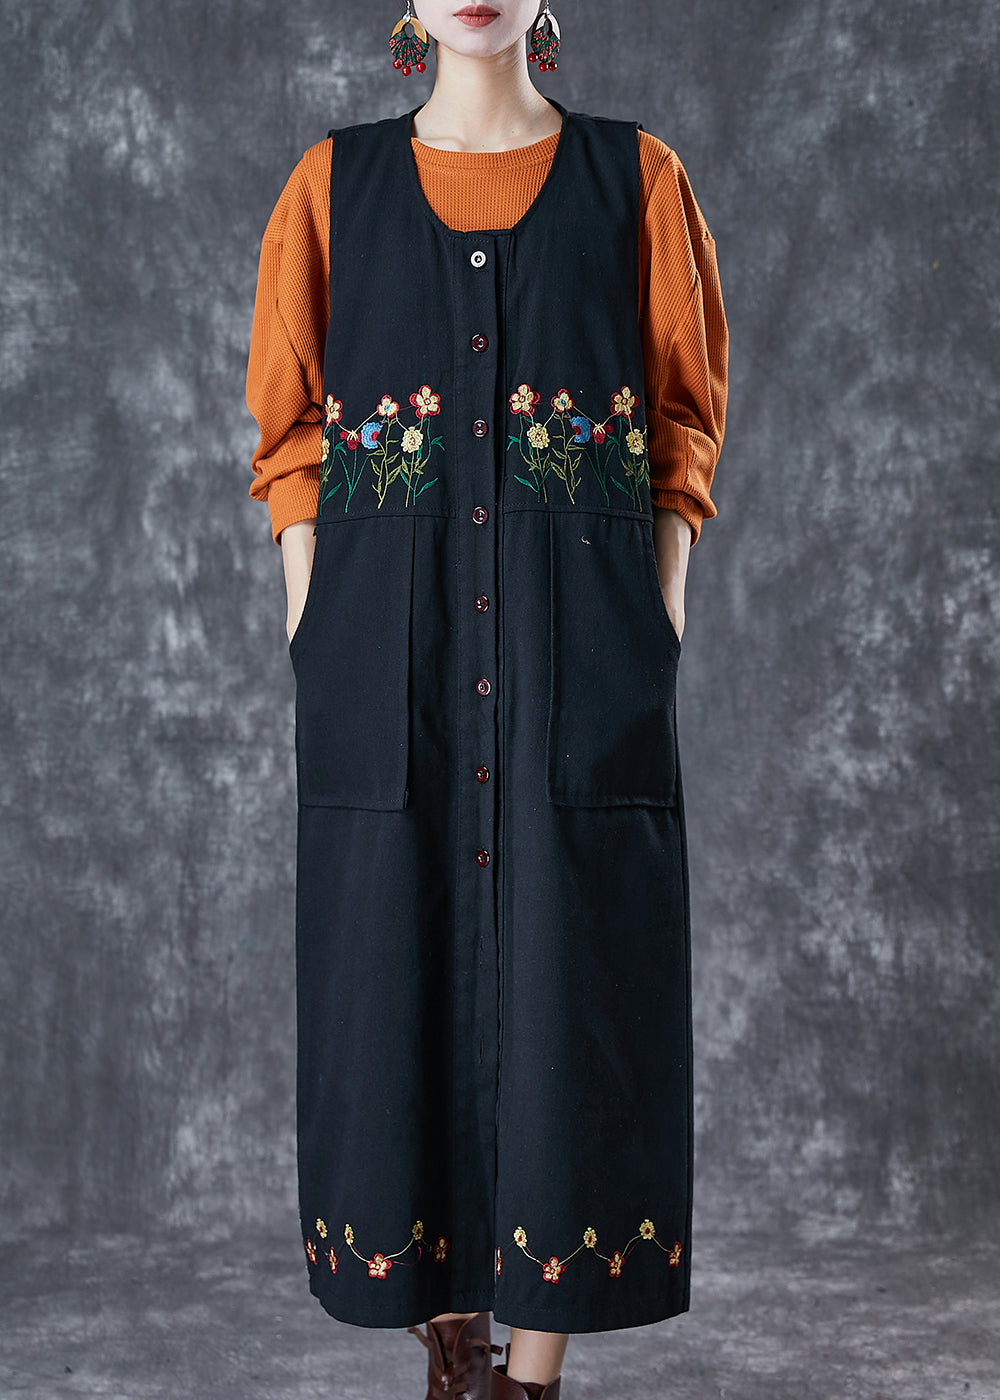 Bohemian Black Embroideried Pockets Cotton Two Pieces Set Spring